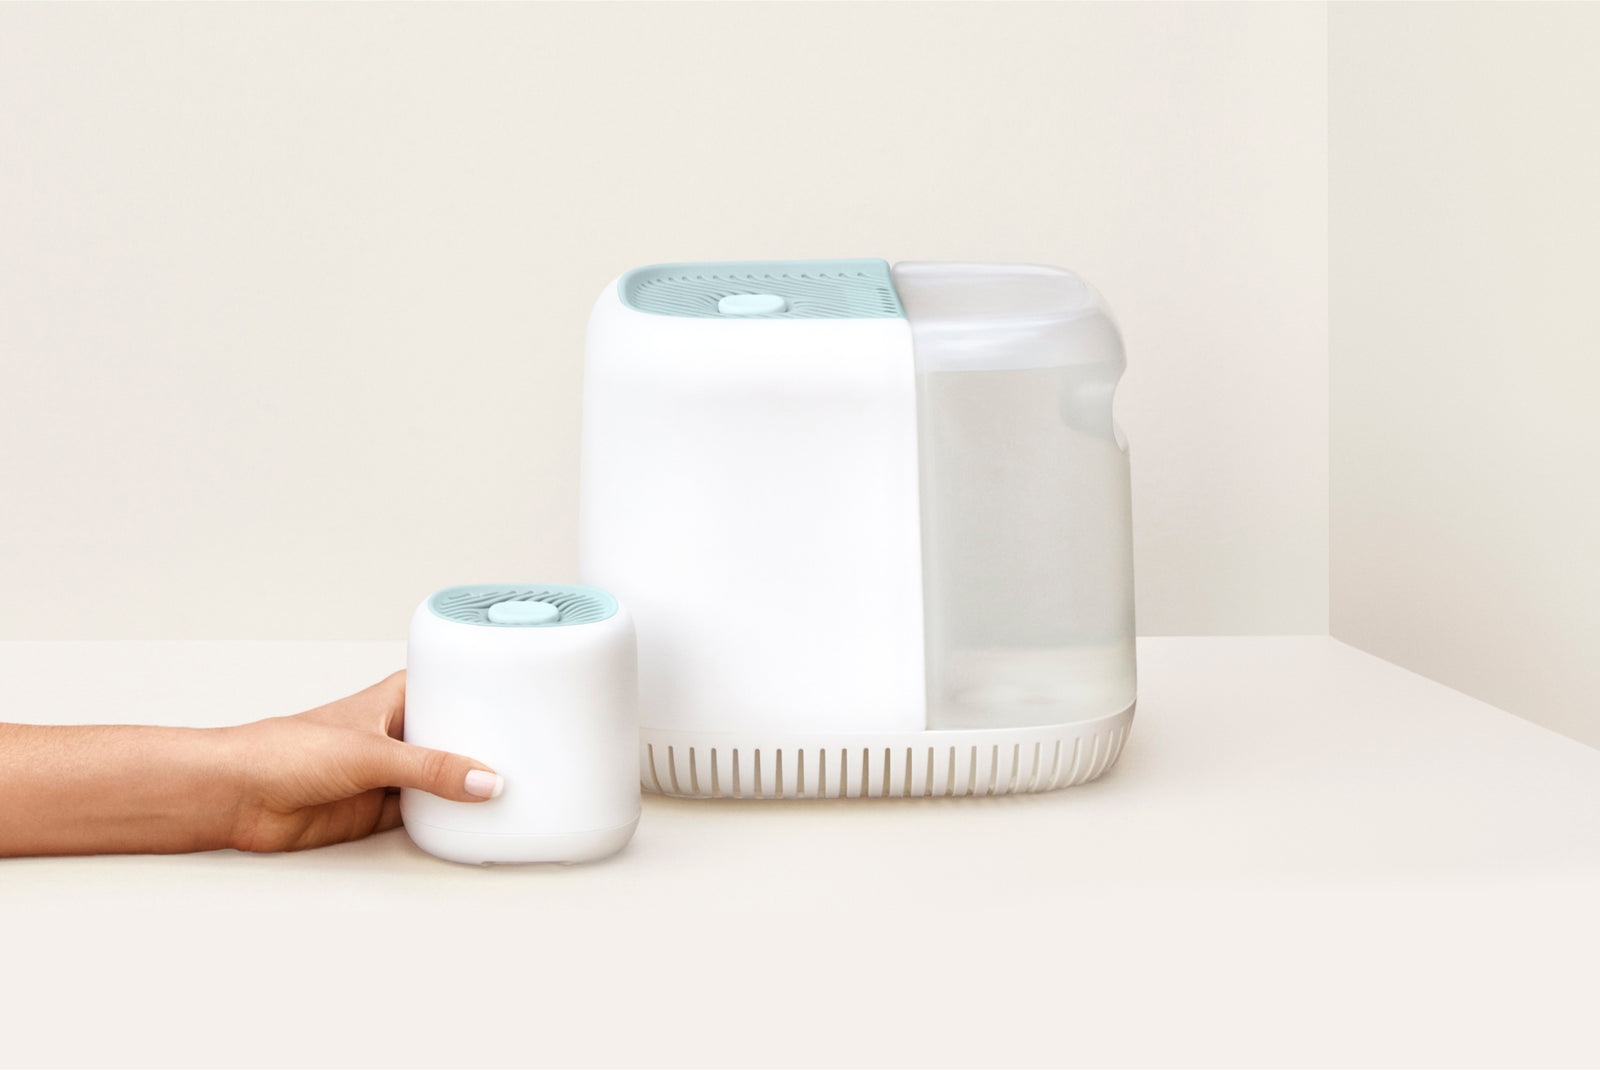 Best Humidifier for Skincare - World's Cleanest Humidifier